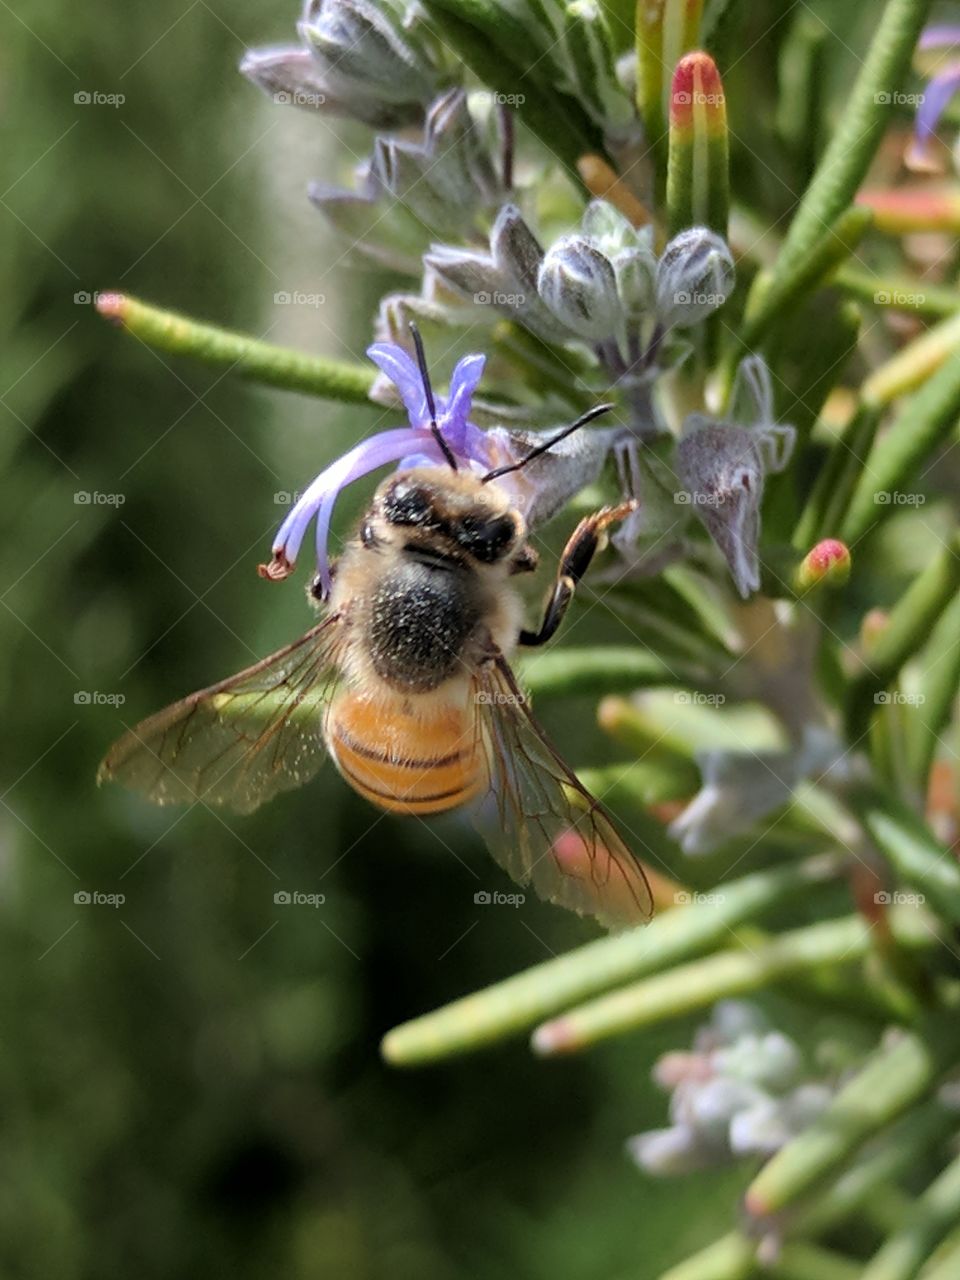 great close up of a bee & rosemary flower